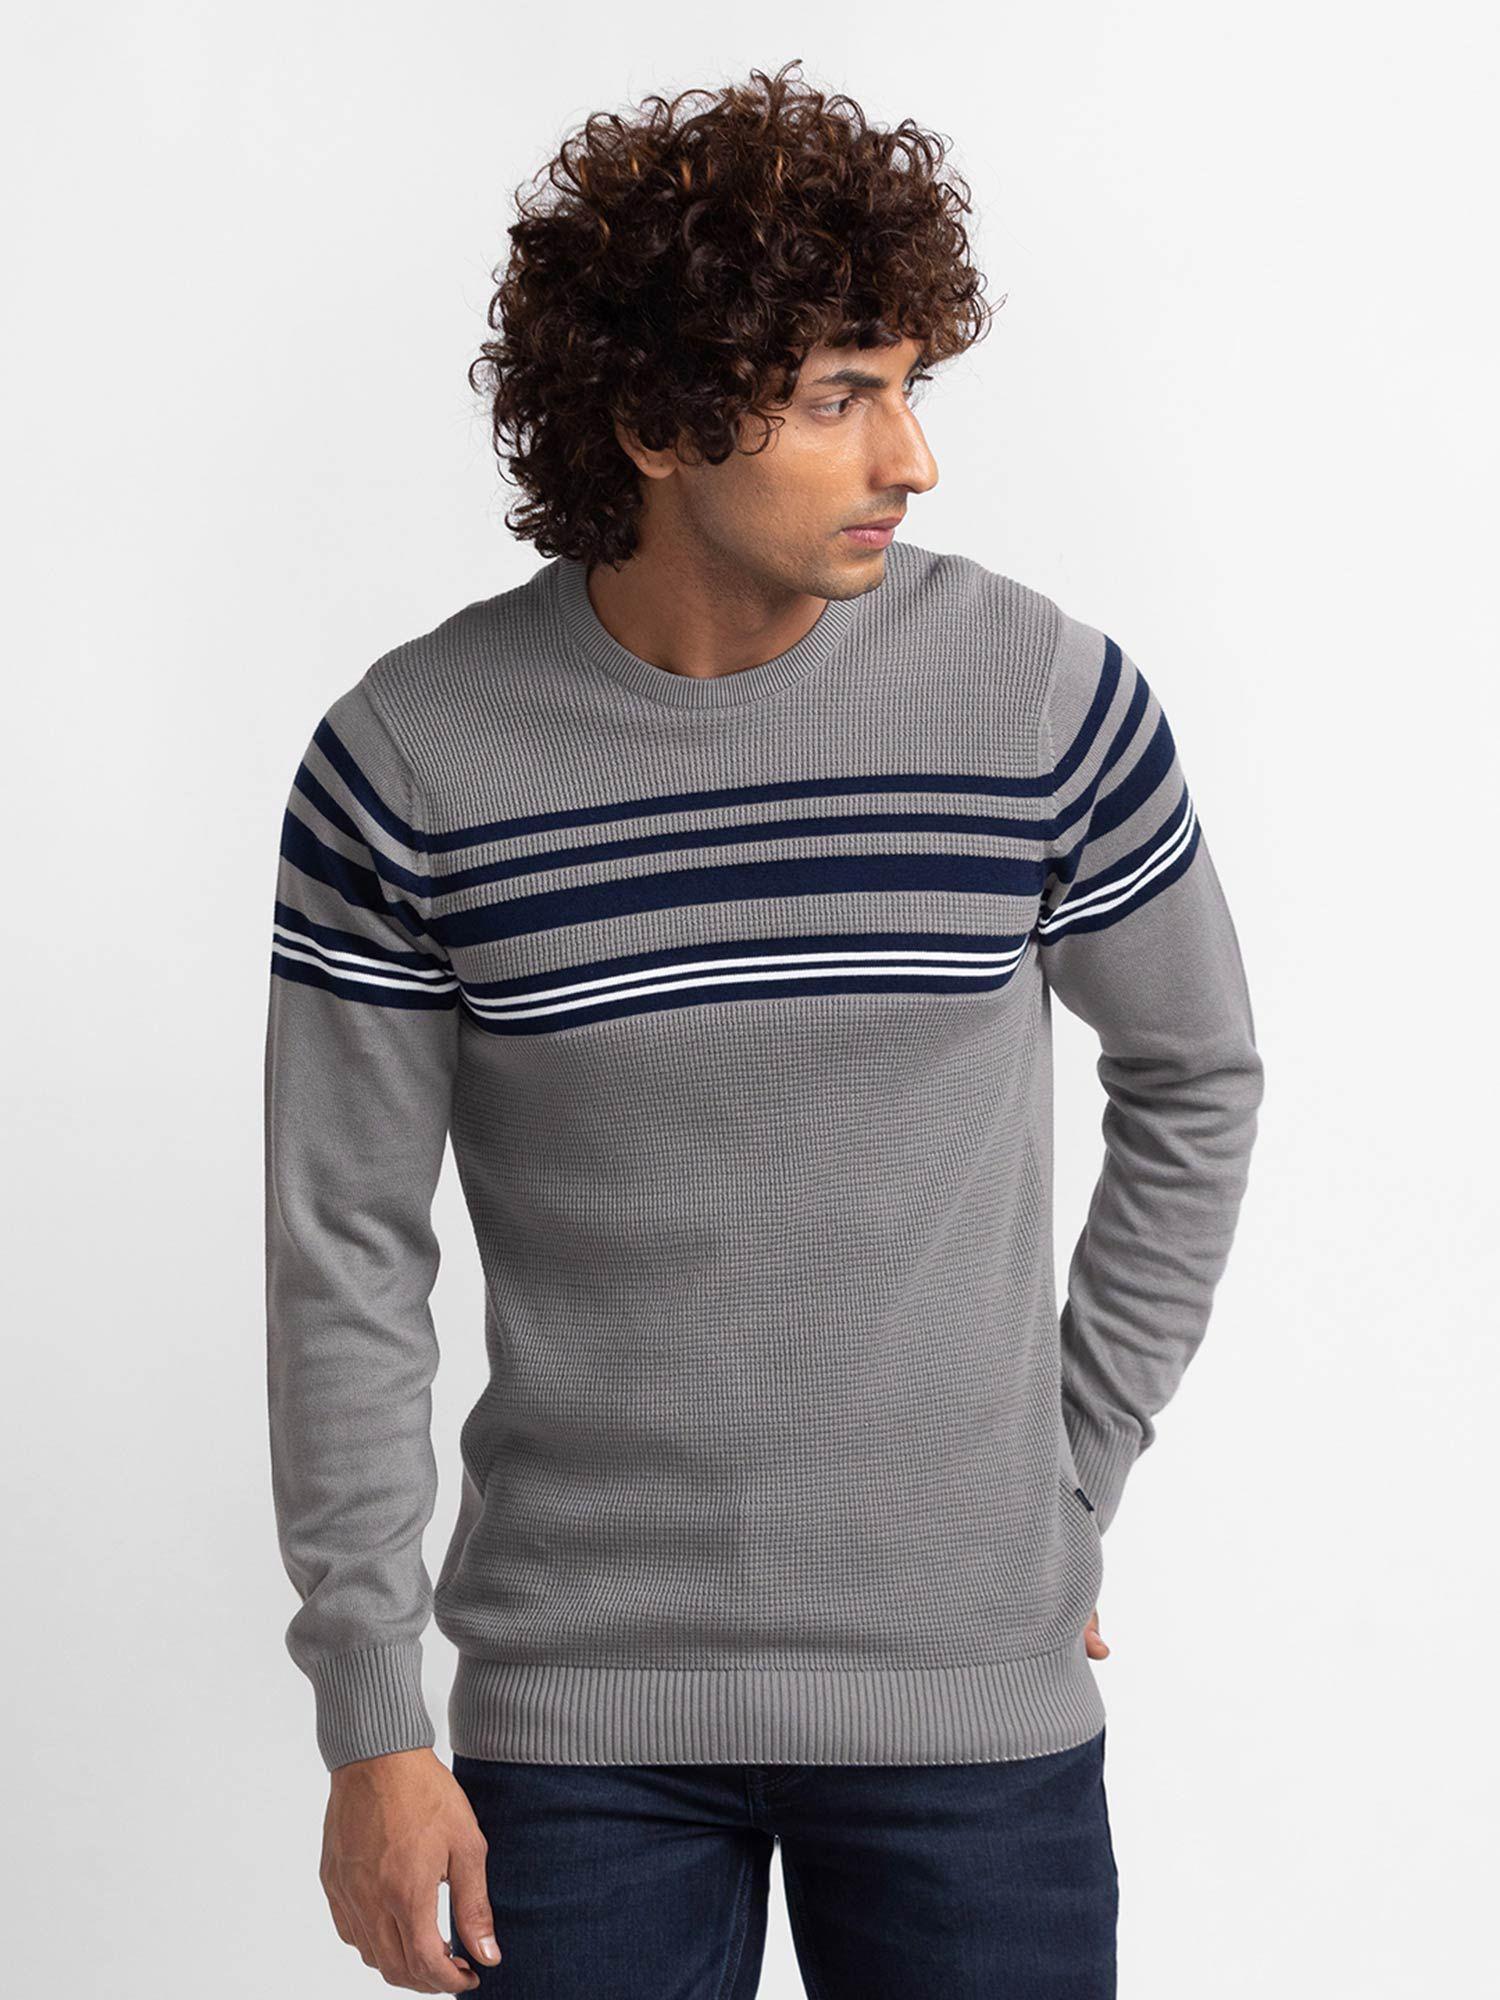 Cement Grey Navy Cotton Full Sleeve Casual Sweater